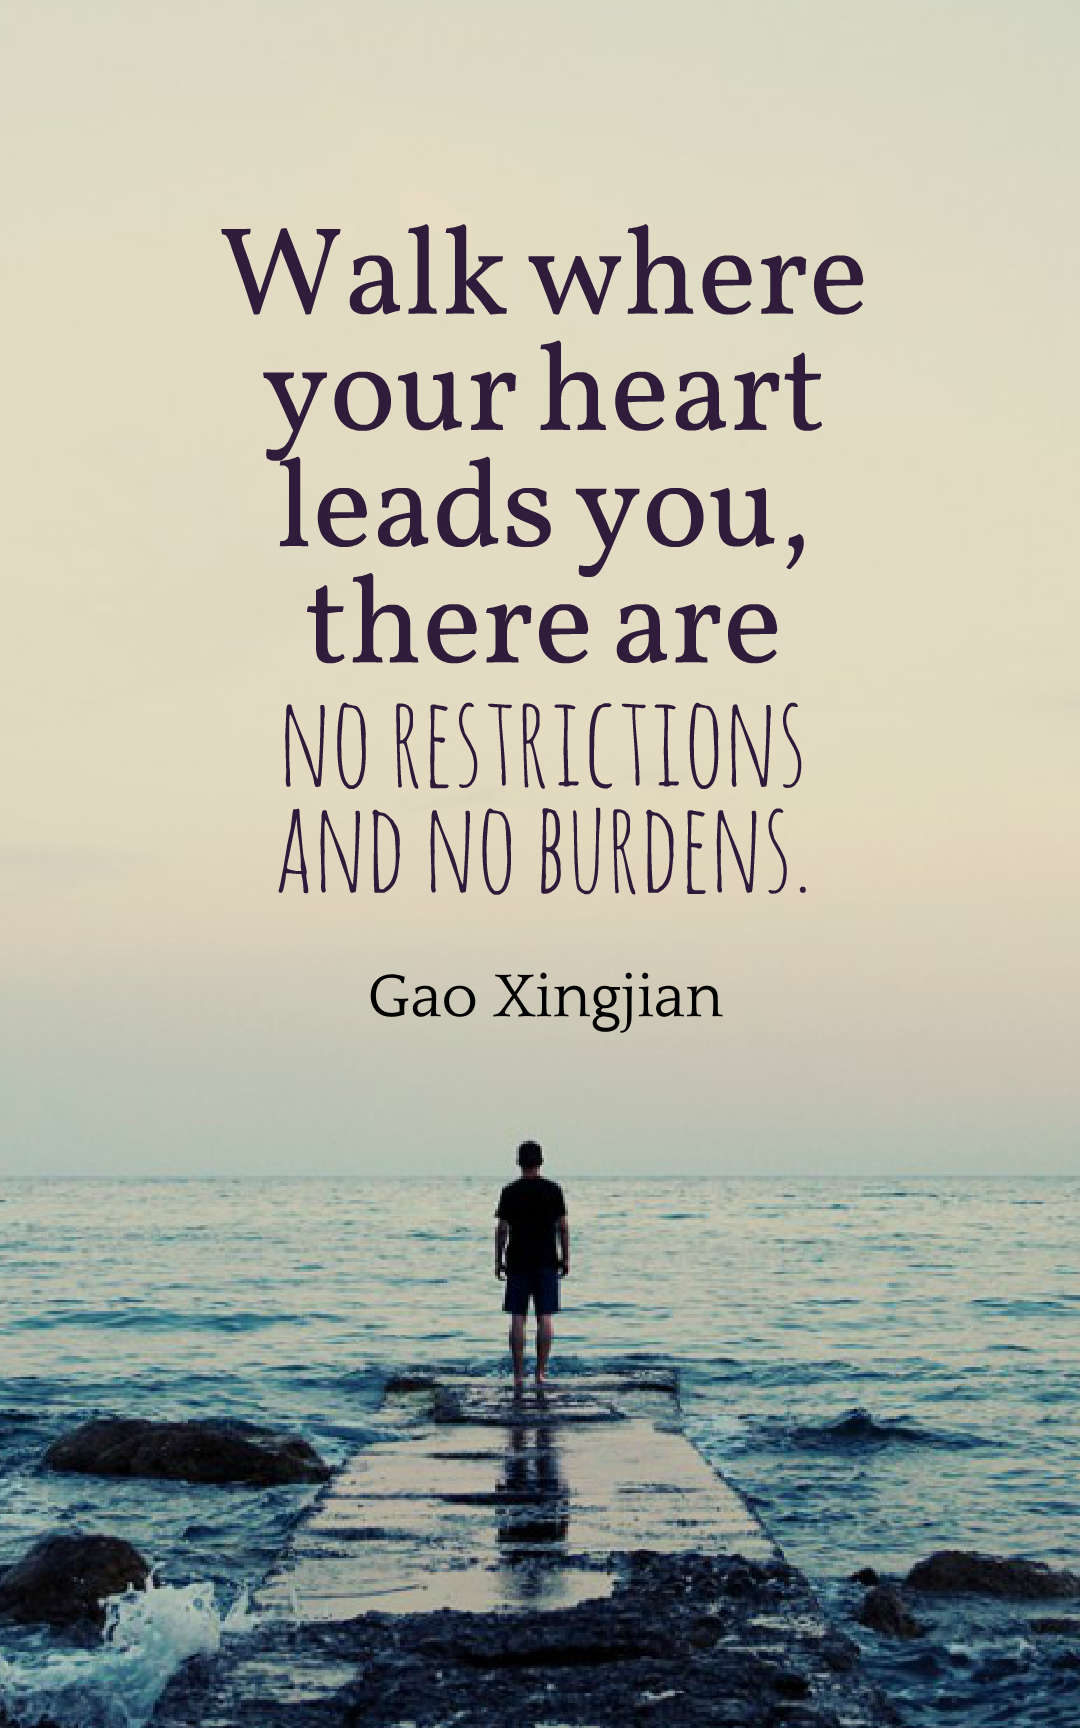 Walk where your heart leads you, there are no restrictions and no burdens.